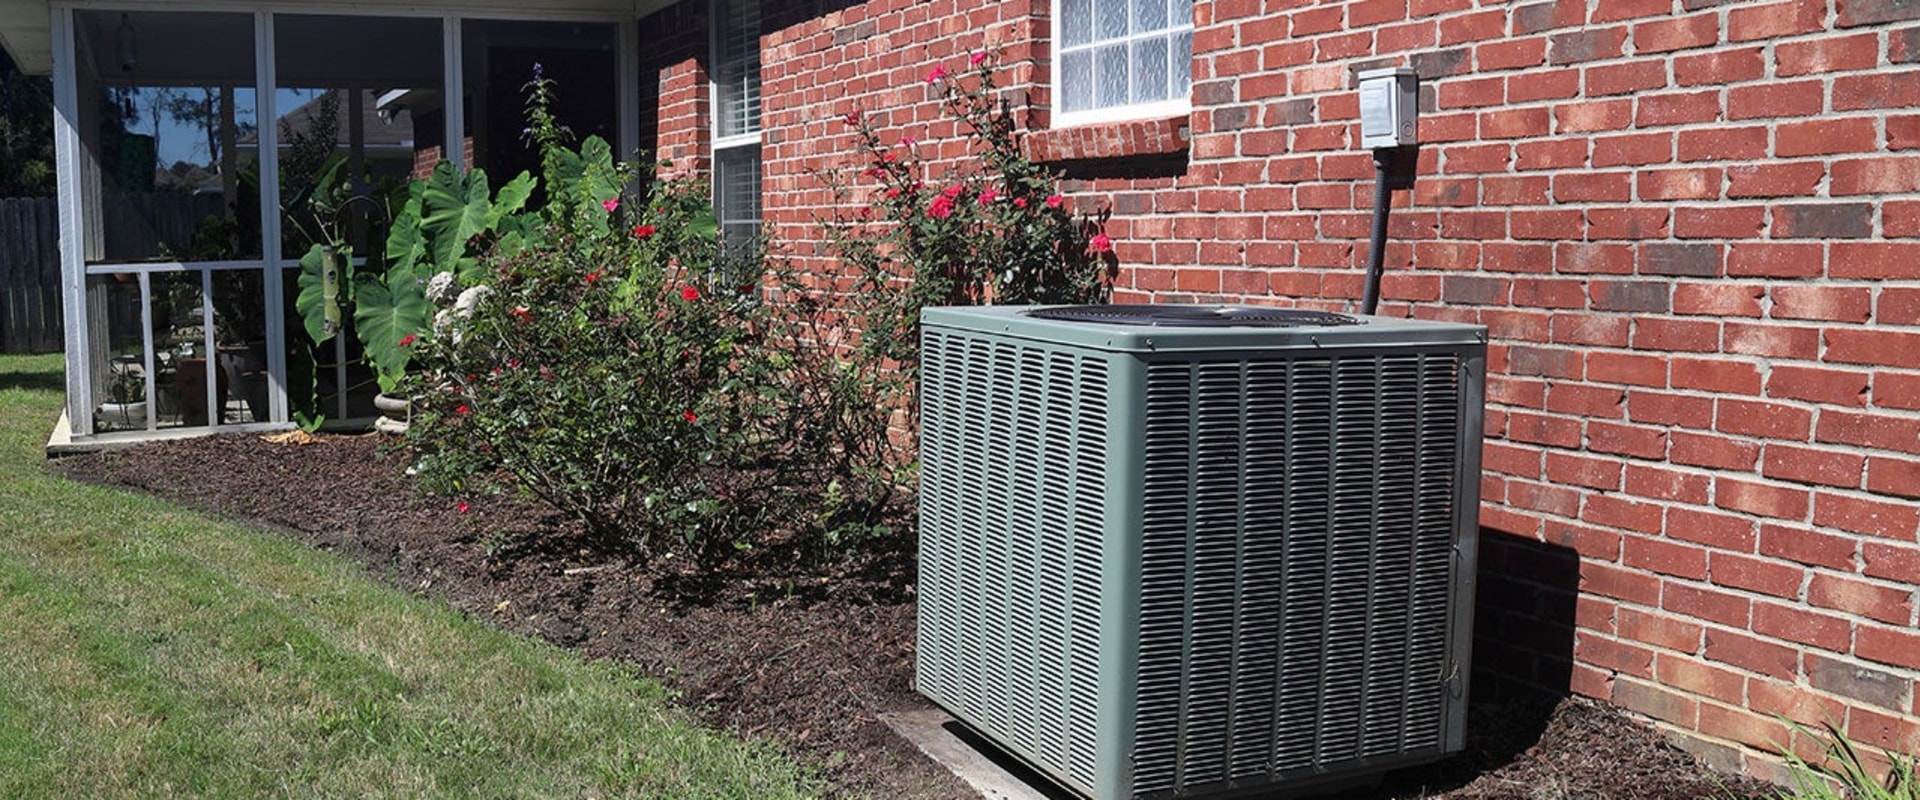 Why Does HVAC Installation Cost So Much? - An Expert's Perspective